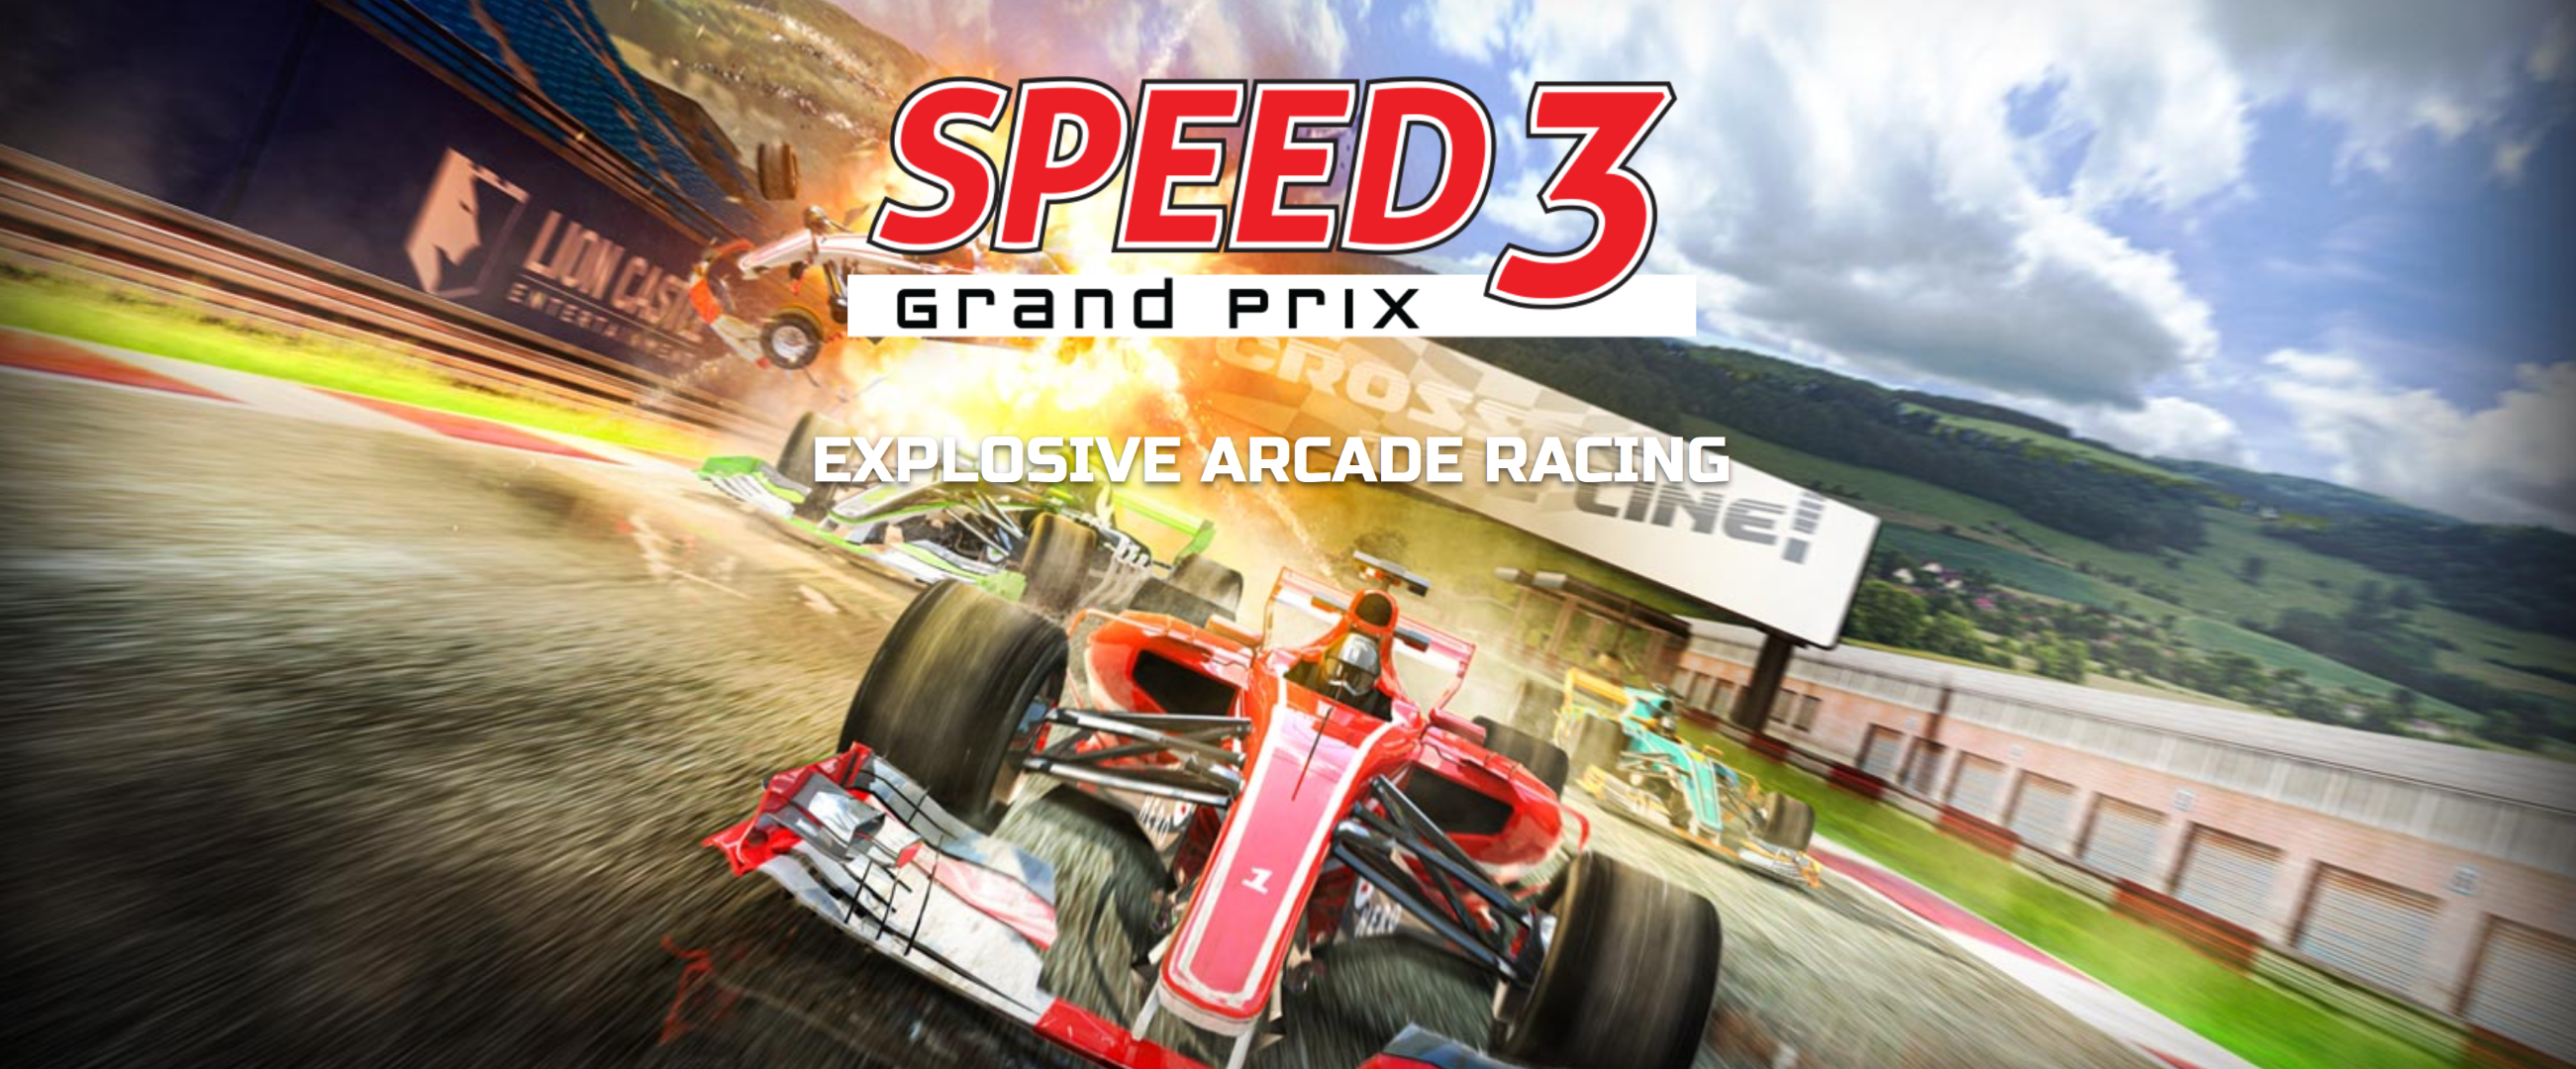 Speed 3: Grand Prix Review